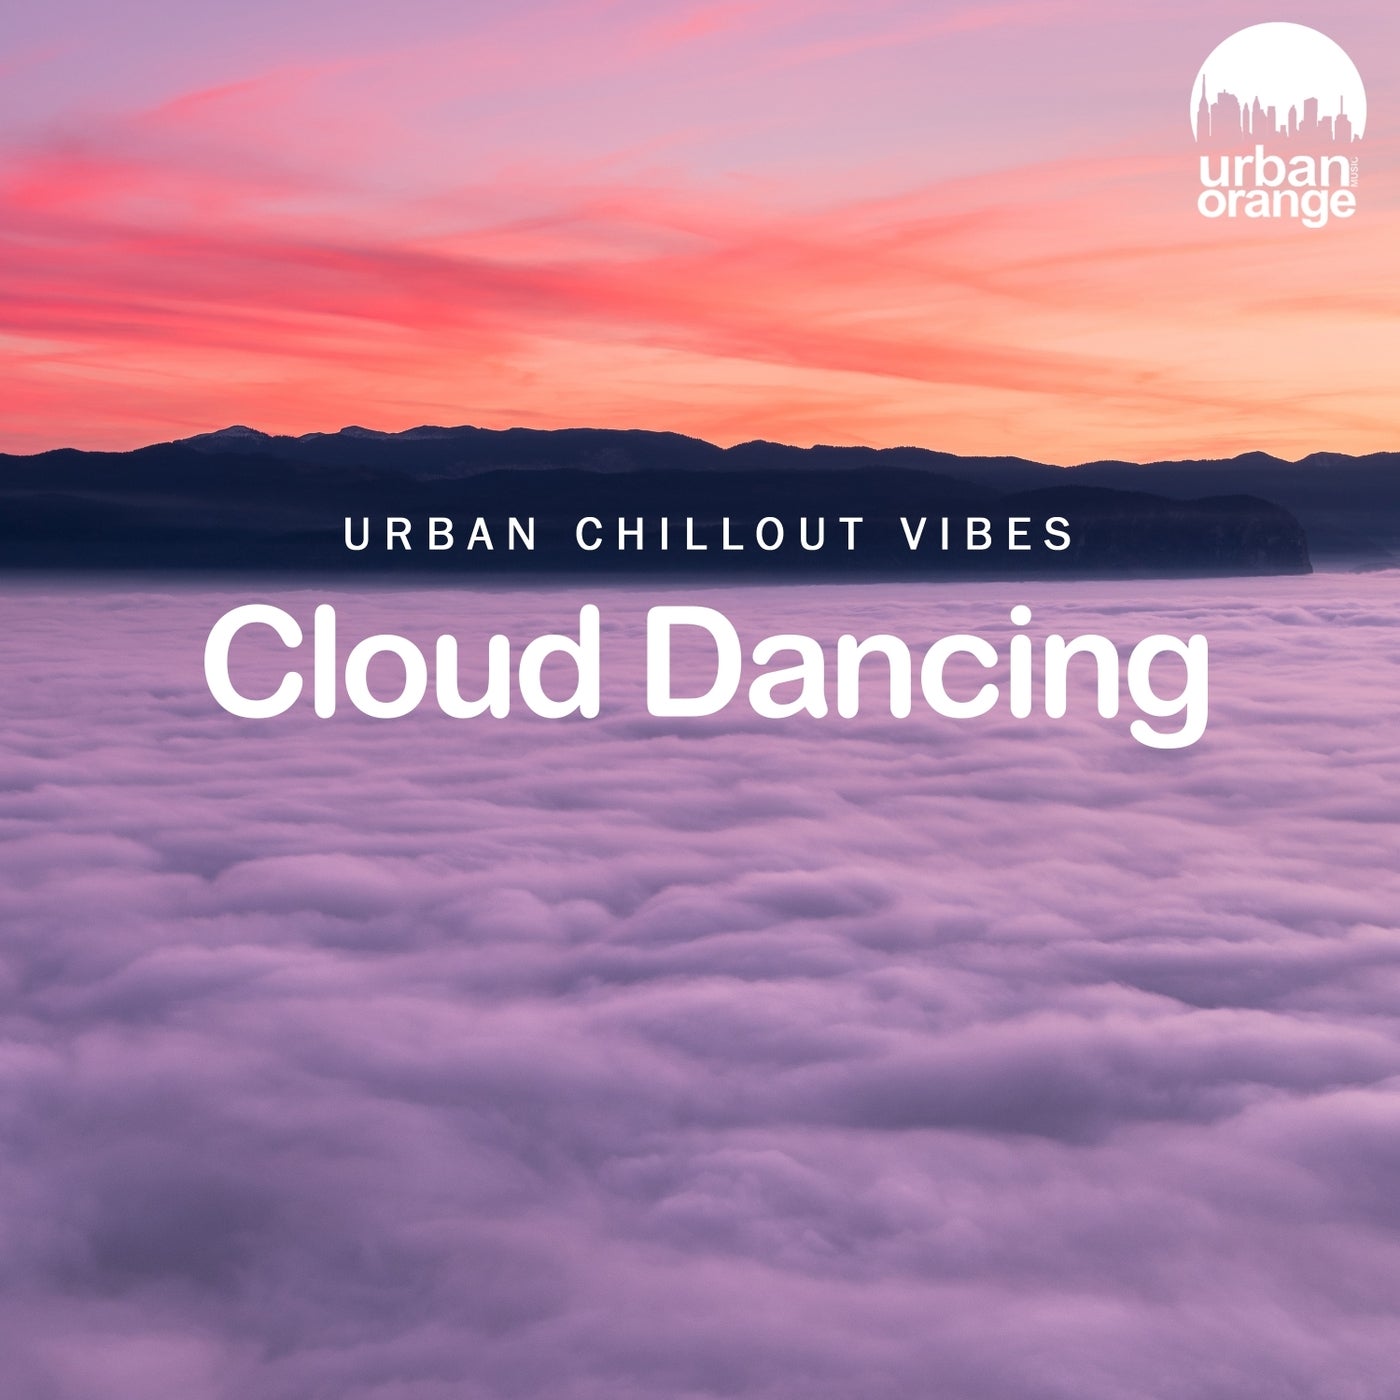 Cloud Dancing - Urban Chillout Vibes